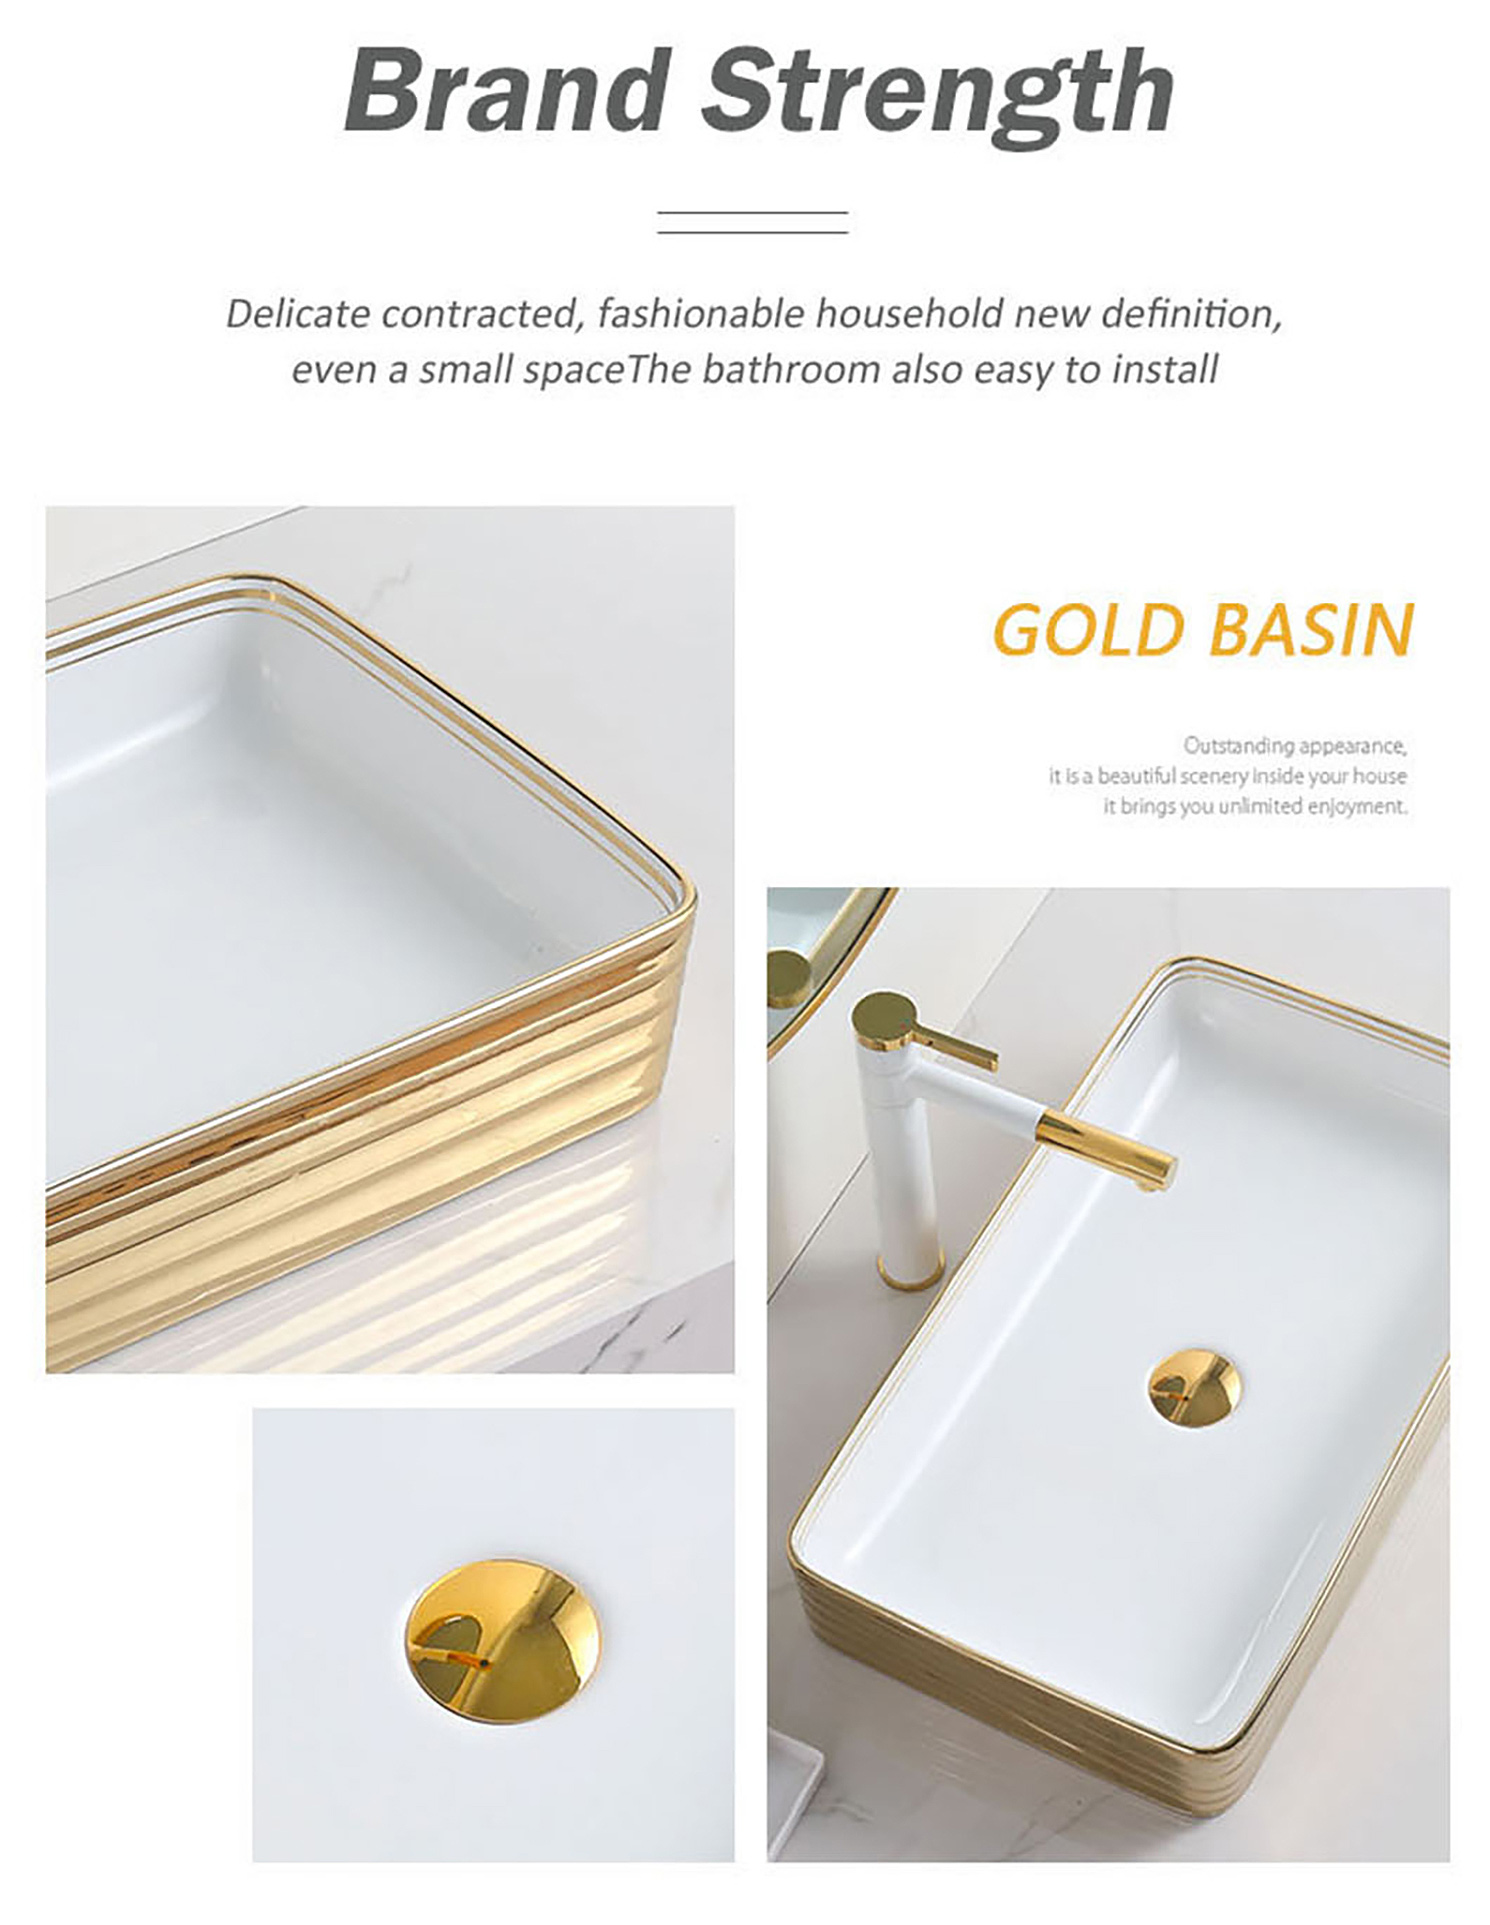 Gold-plated-basin-details_04